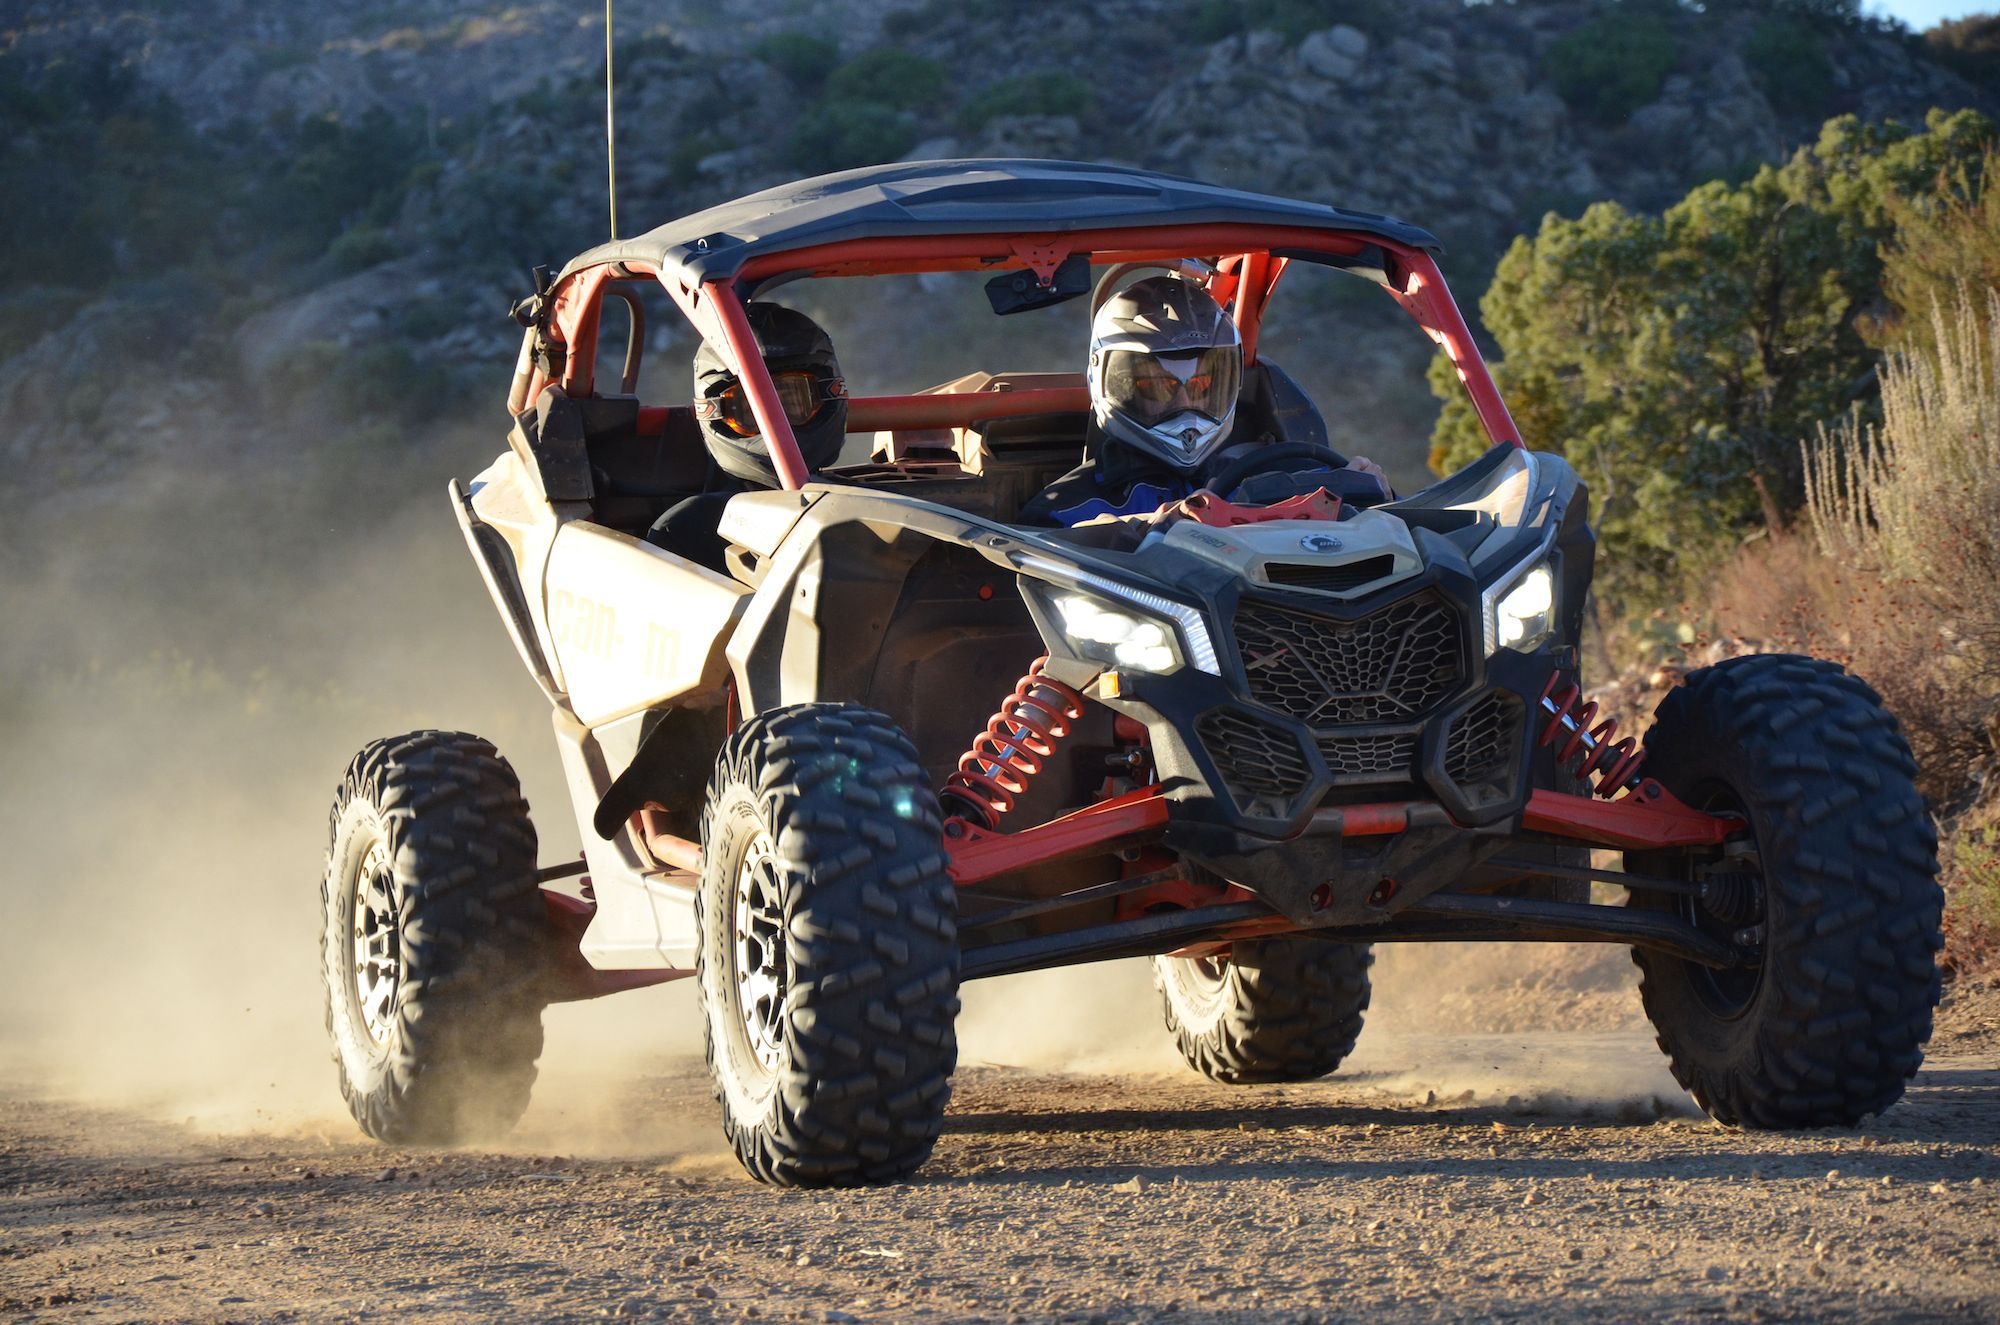 First Impressions of the 2021 Can-Am Maverick X3